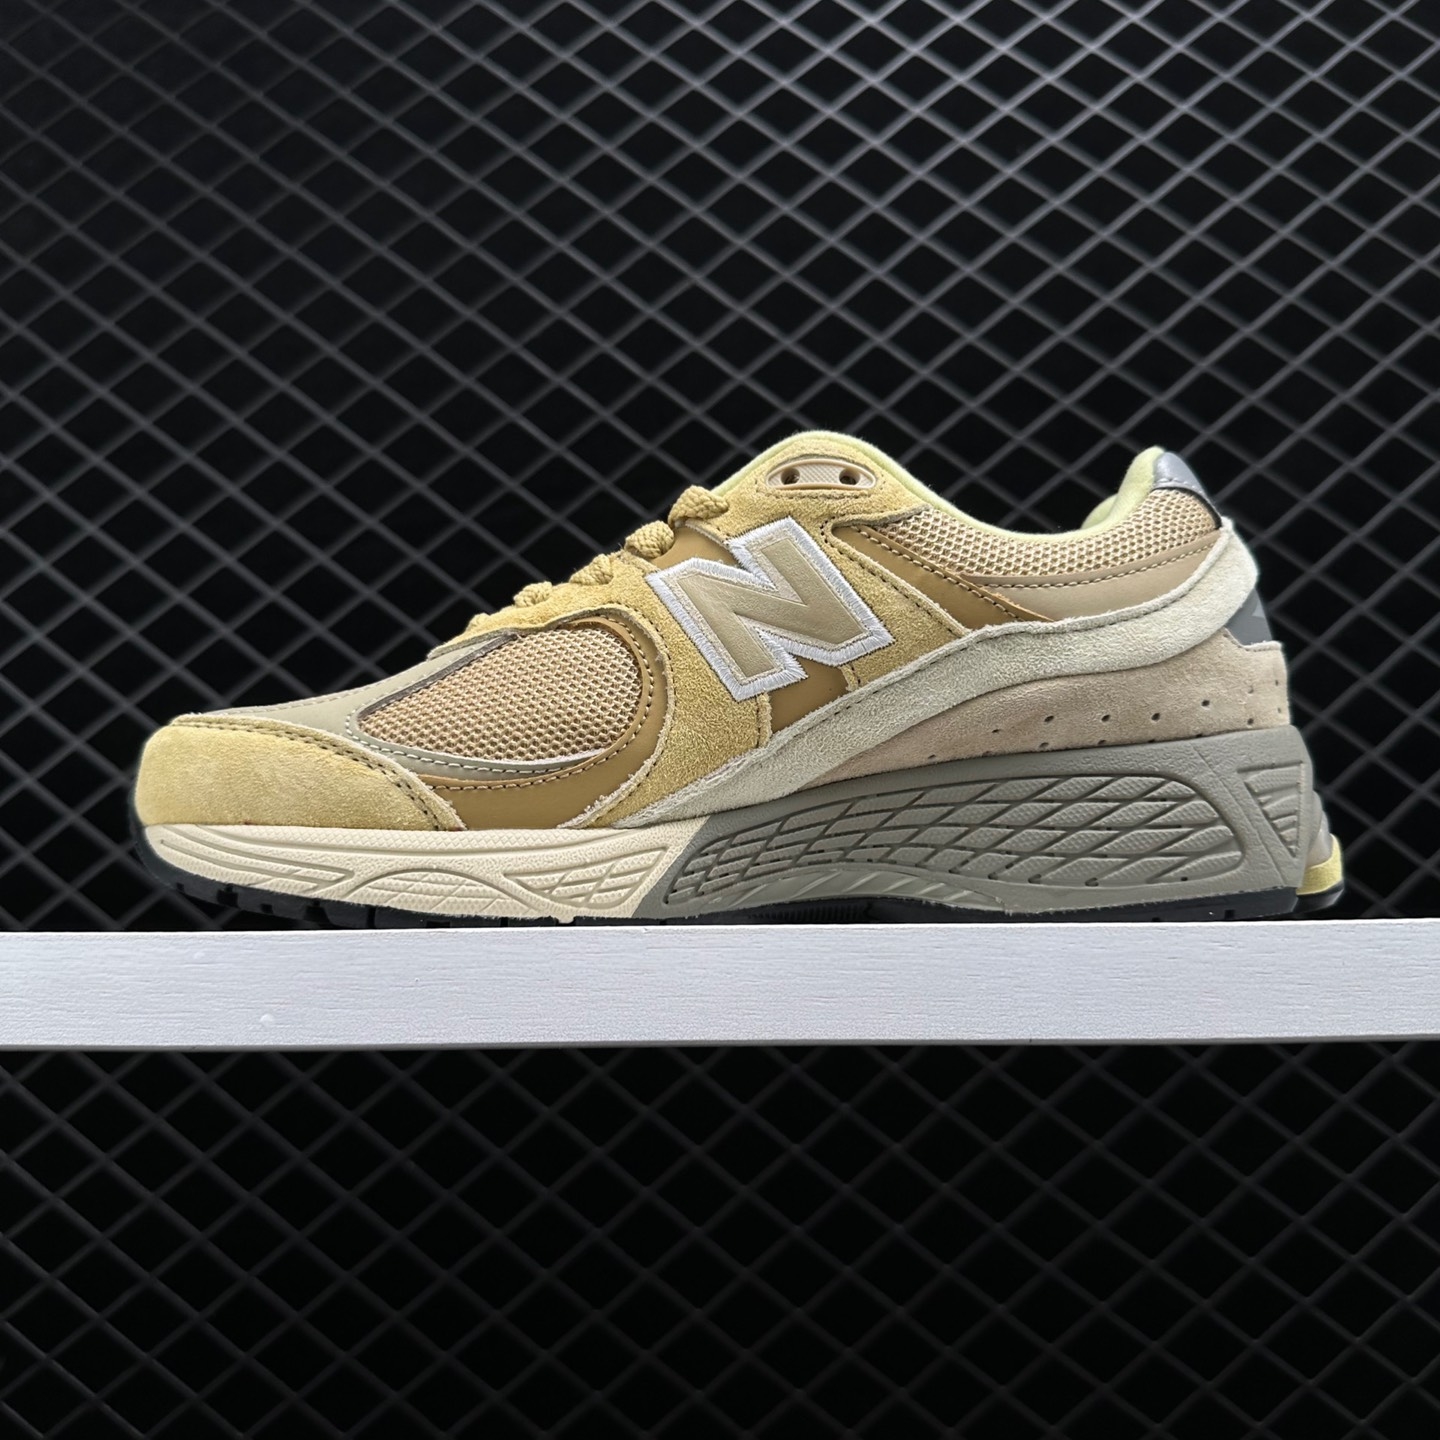 New Balance 2002R AURALEE Yellow Beige - Stylish and Comfortable Sneakers